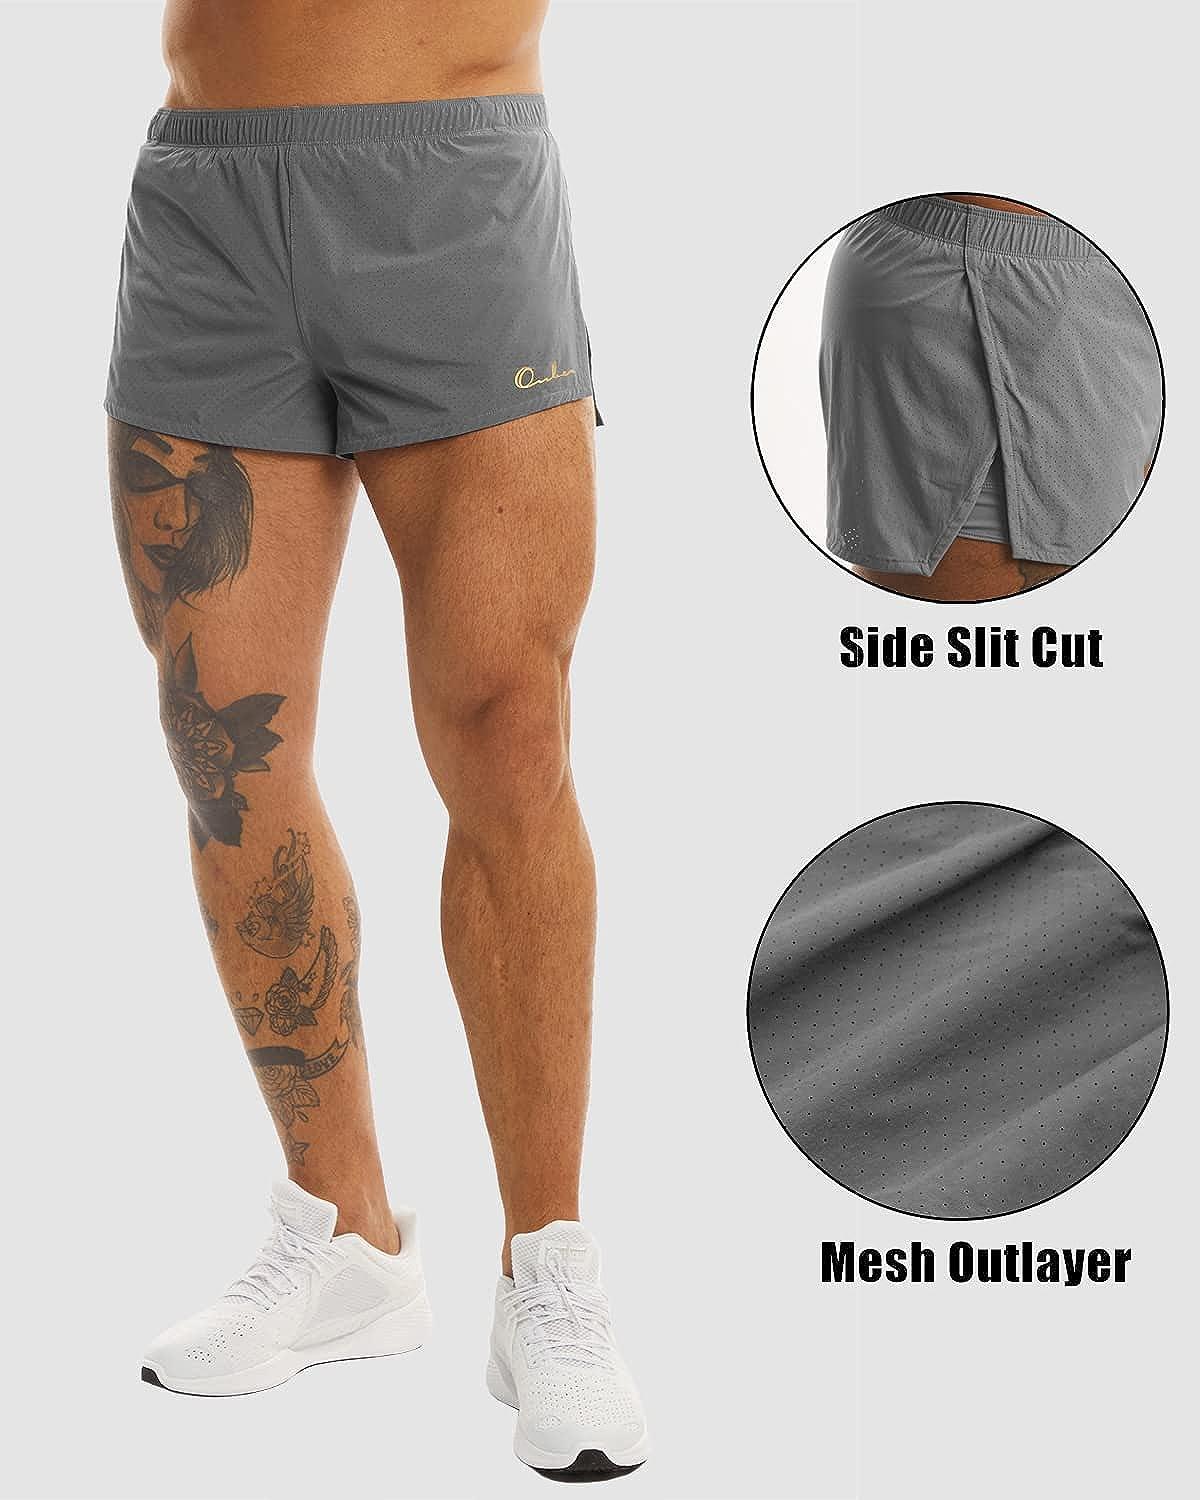 YYDGH On Clearance Men's Side Split Fitted Shorts Bodybuilding